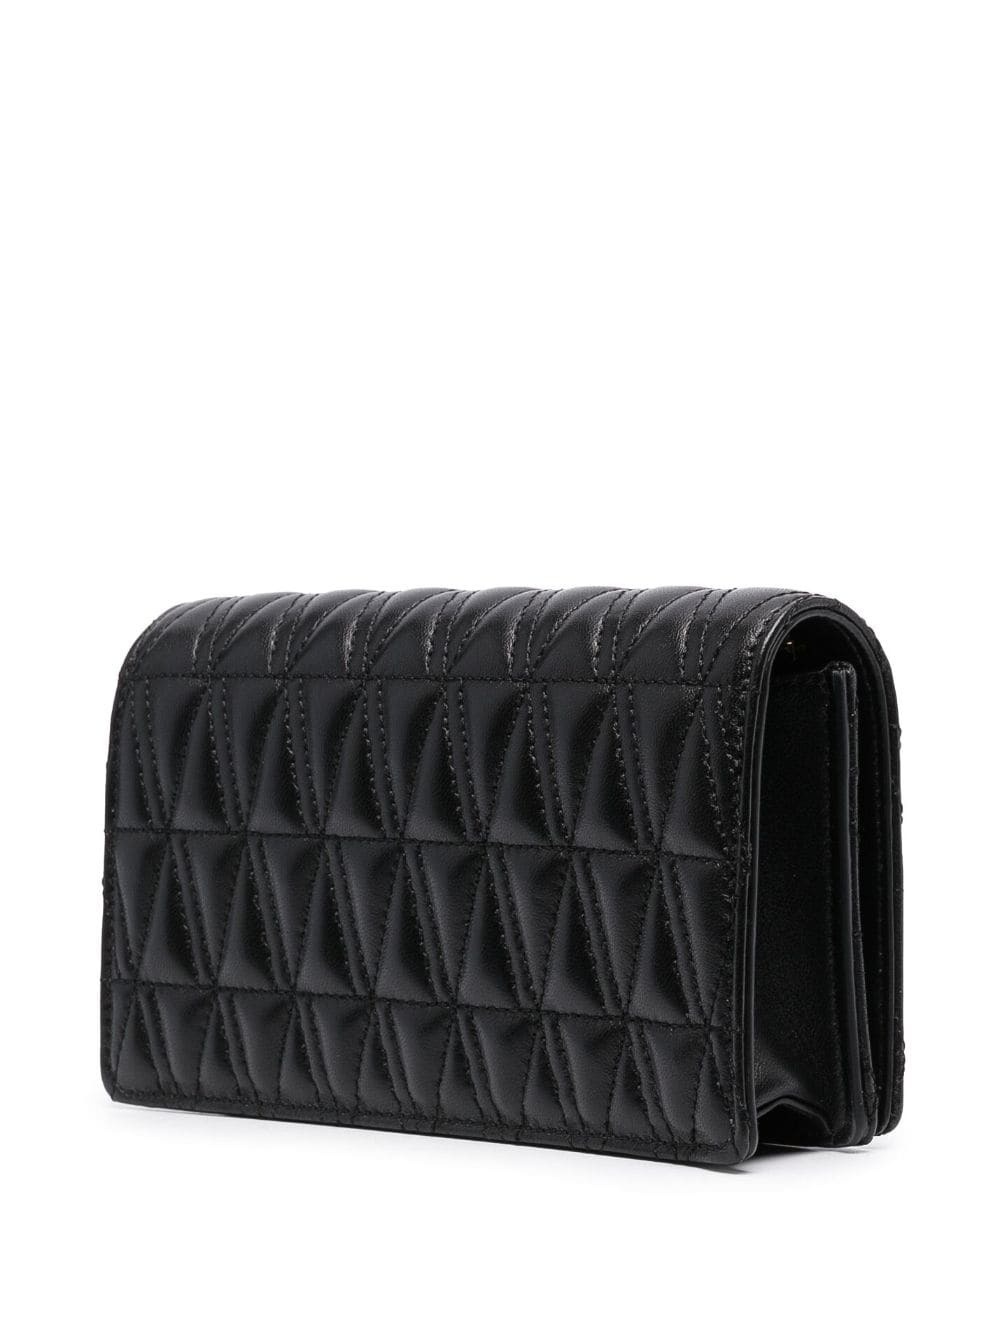 VERSACE - Virtus Quilted Leather Mini Bag Versace